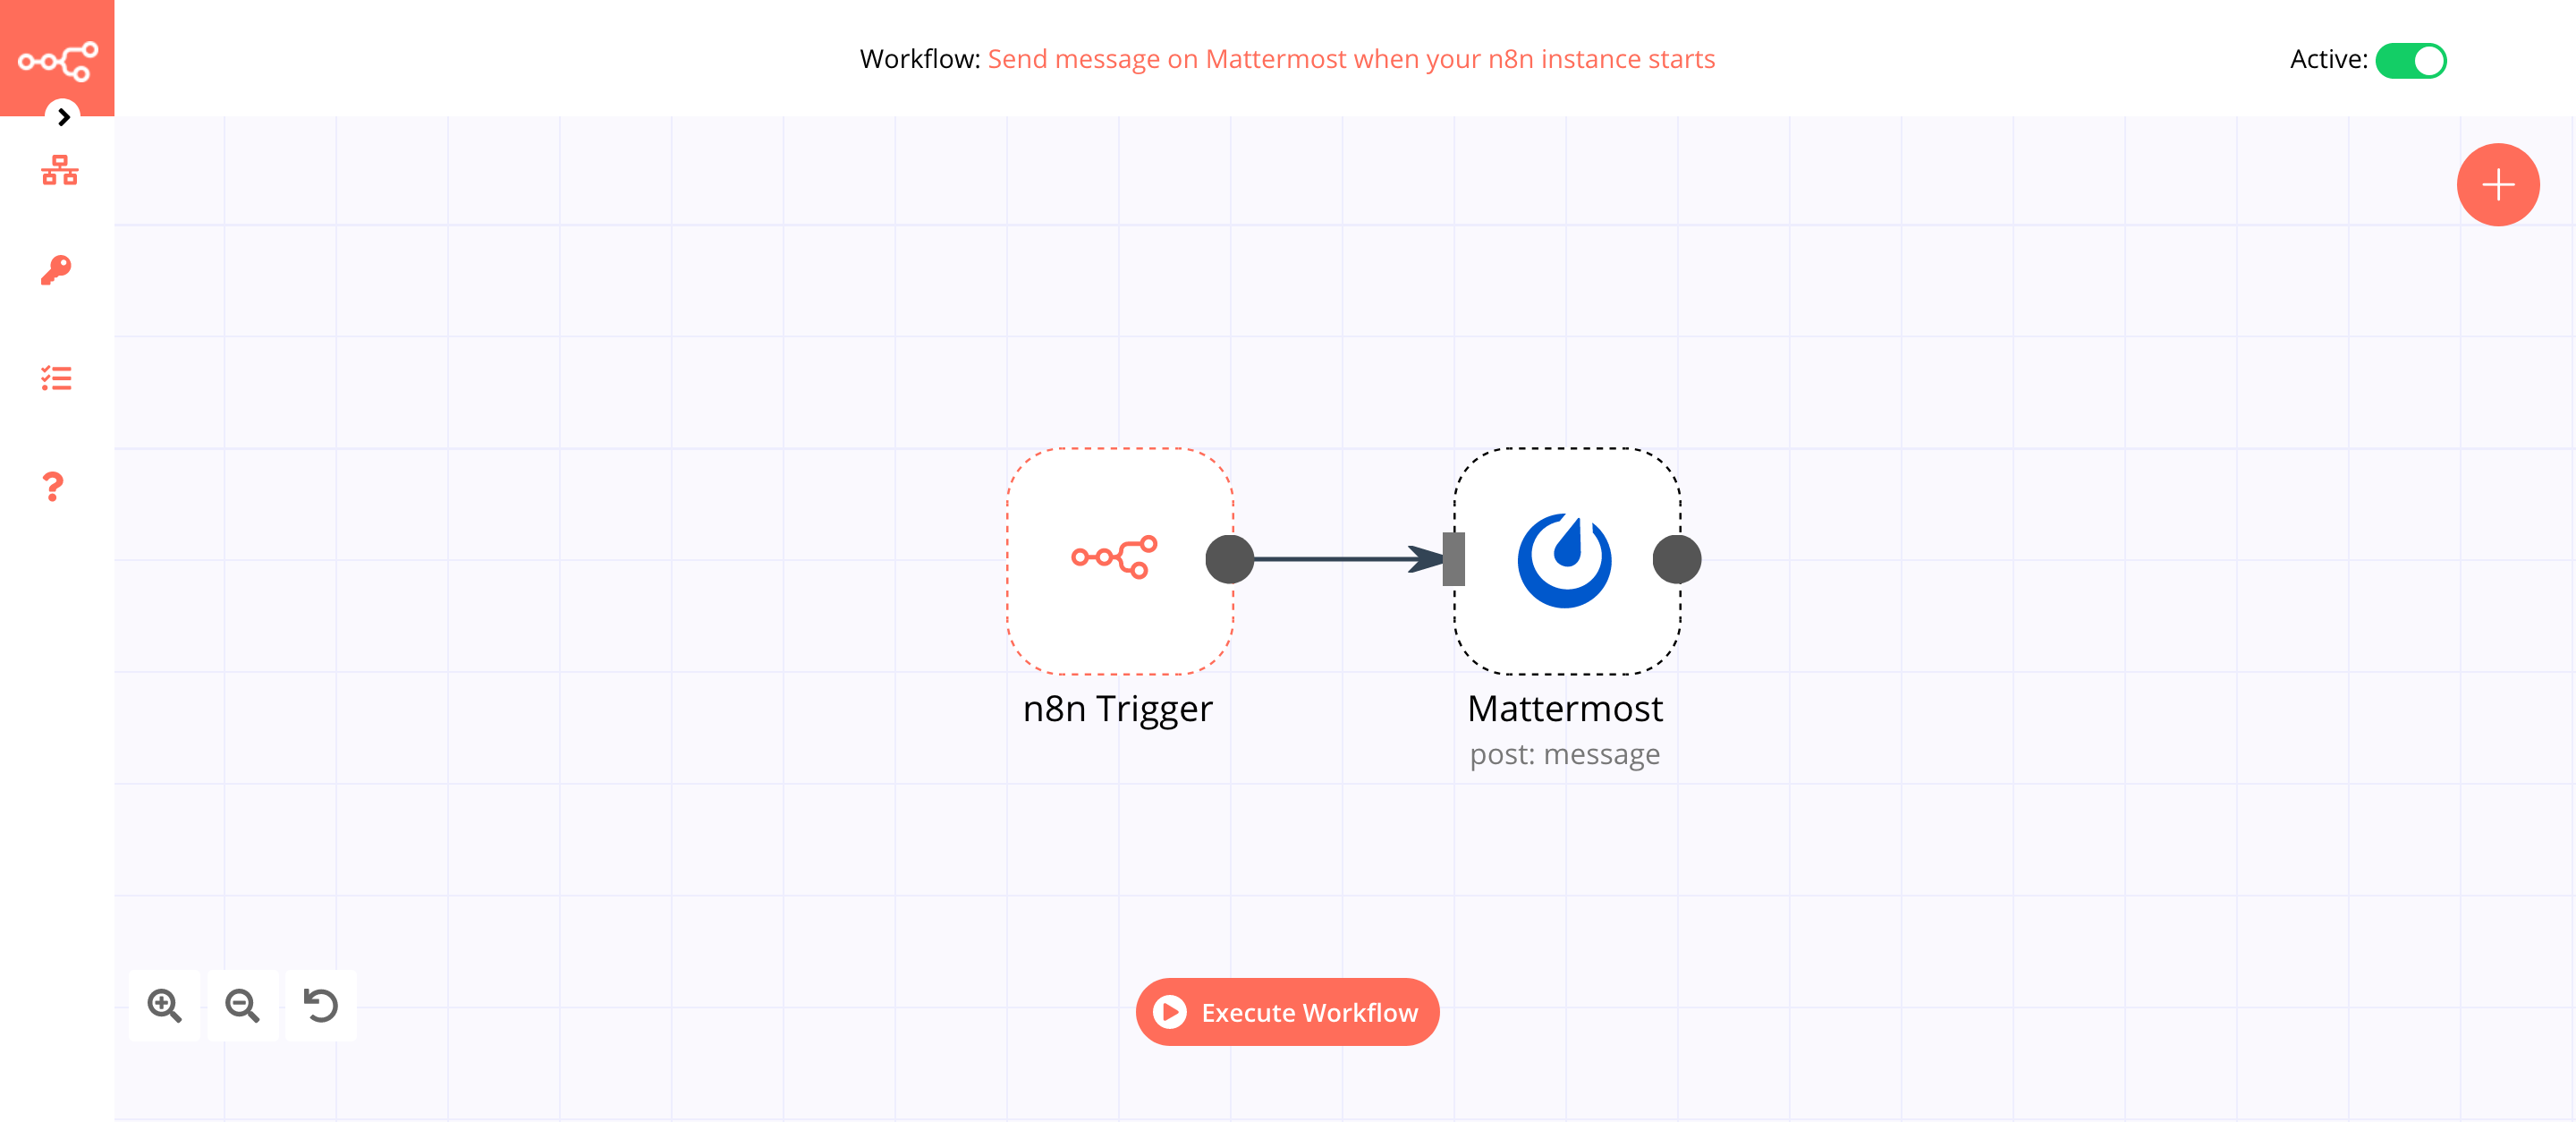 A workflow with the Webhook node